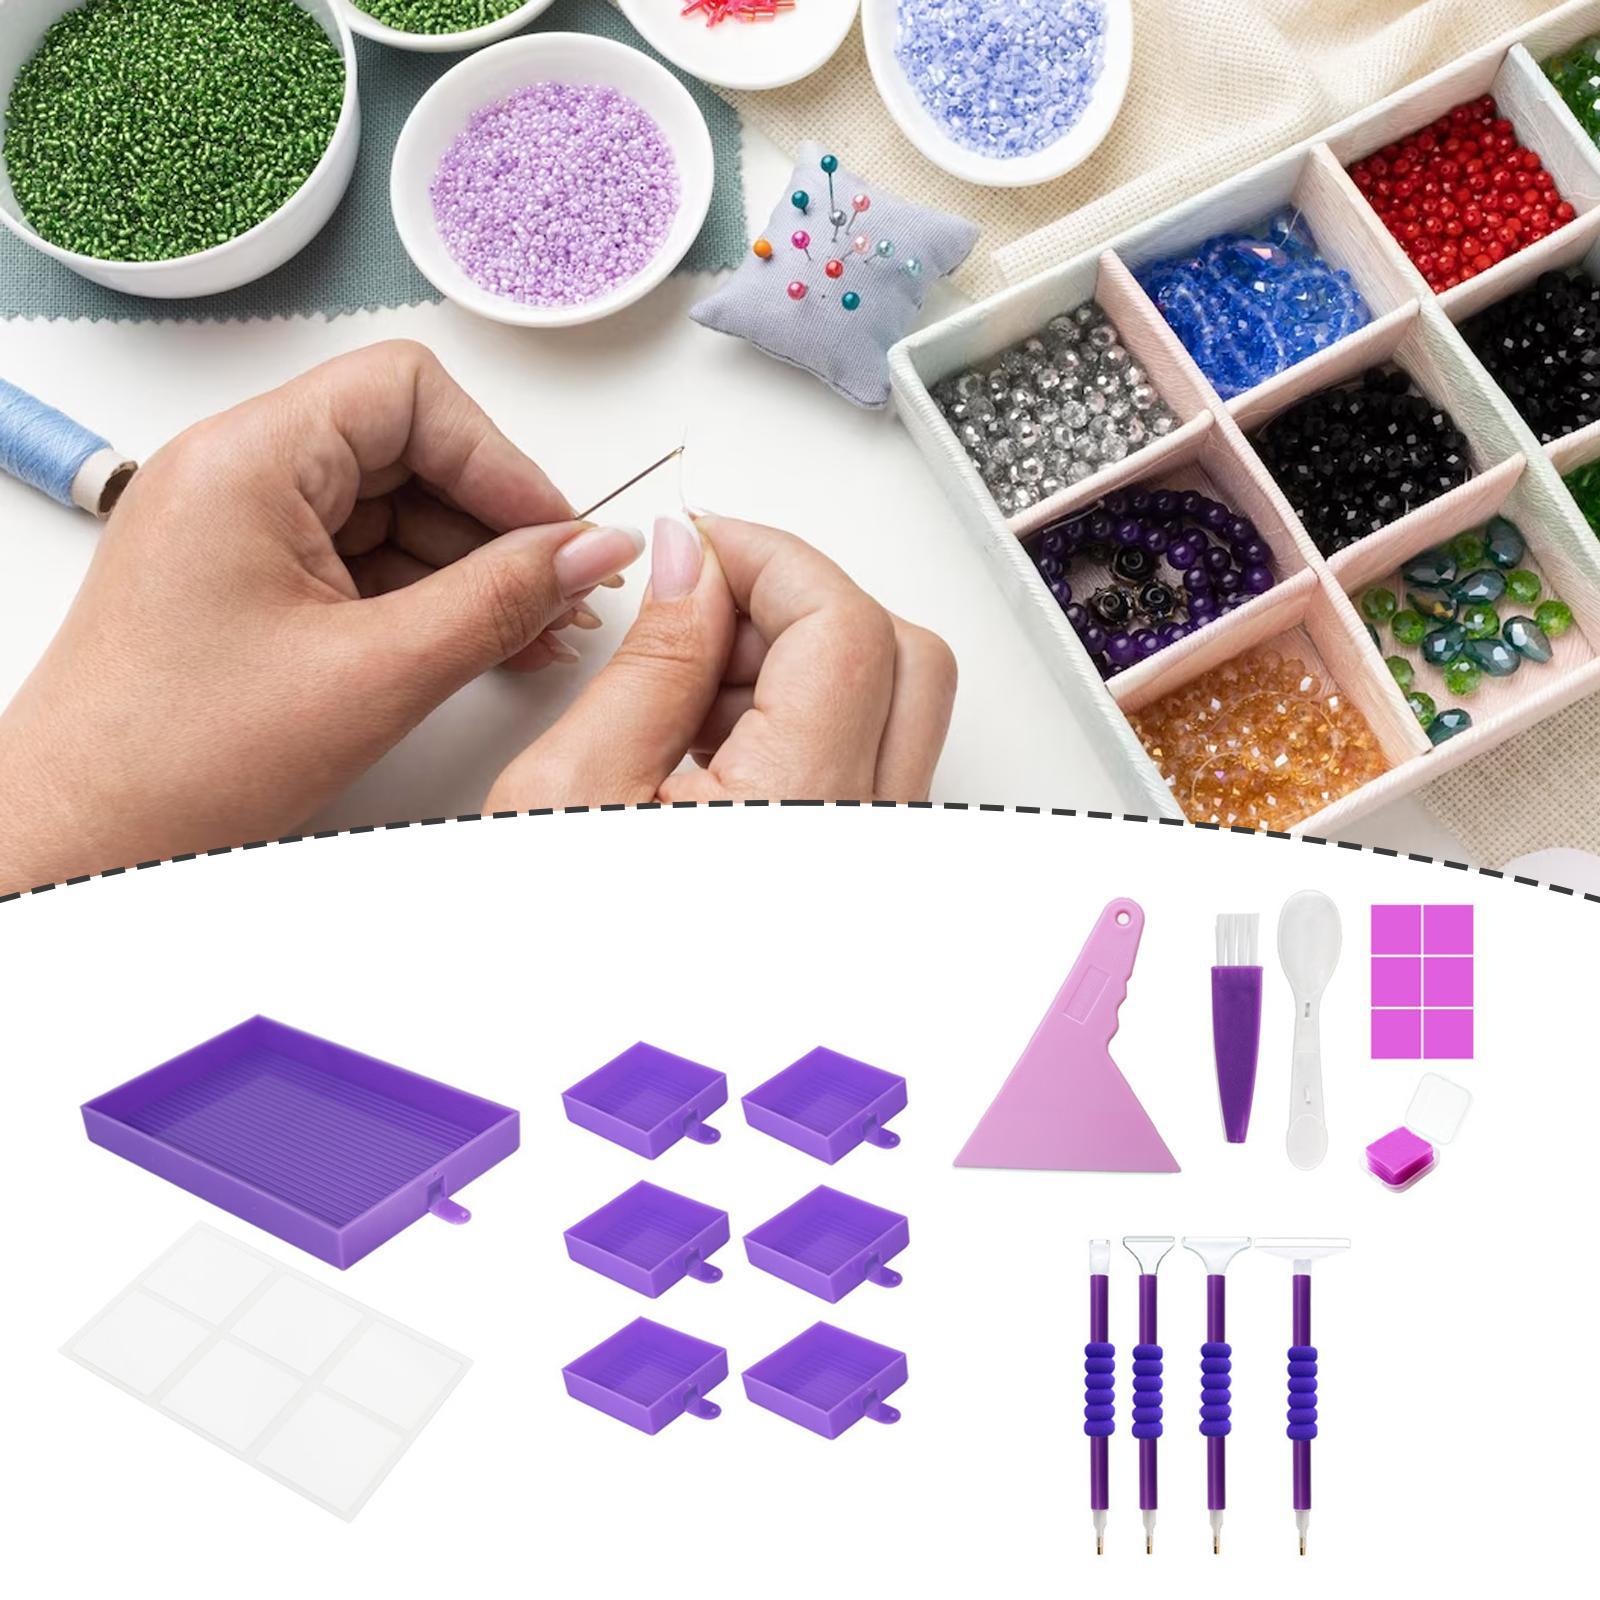 5D Diamond Paintings Tray Kits Large Capacity Bead Tray Sorting with Brush, Storage Containers DIY Craft Big Flip Drill Plate Rhinestone Sorting Trays